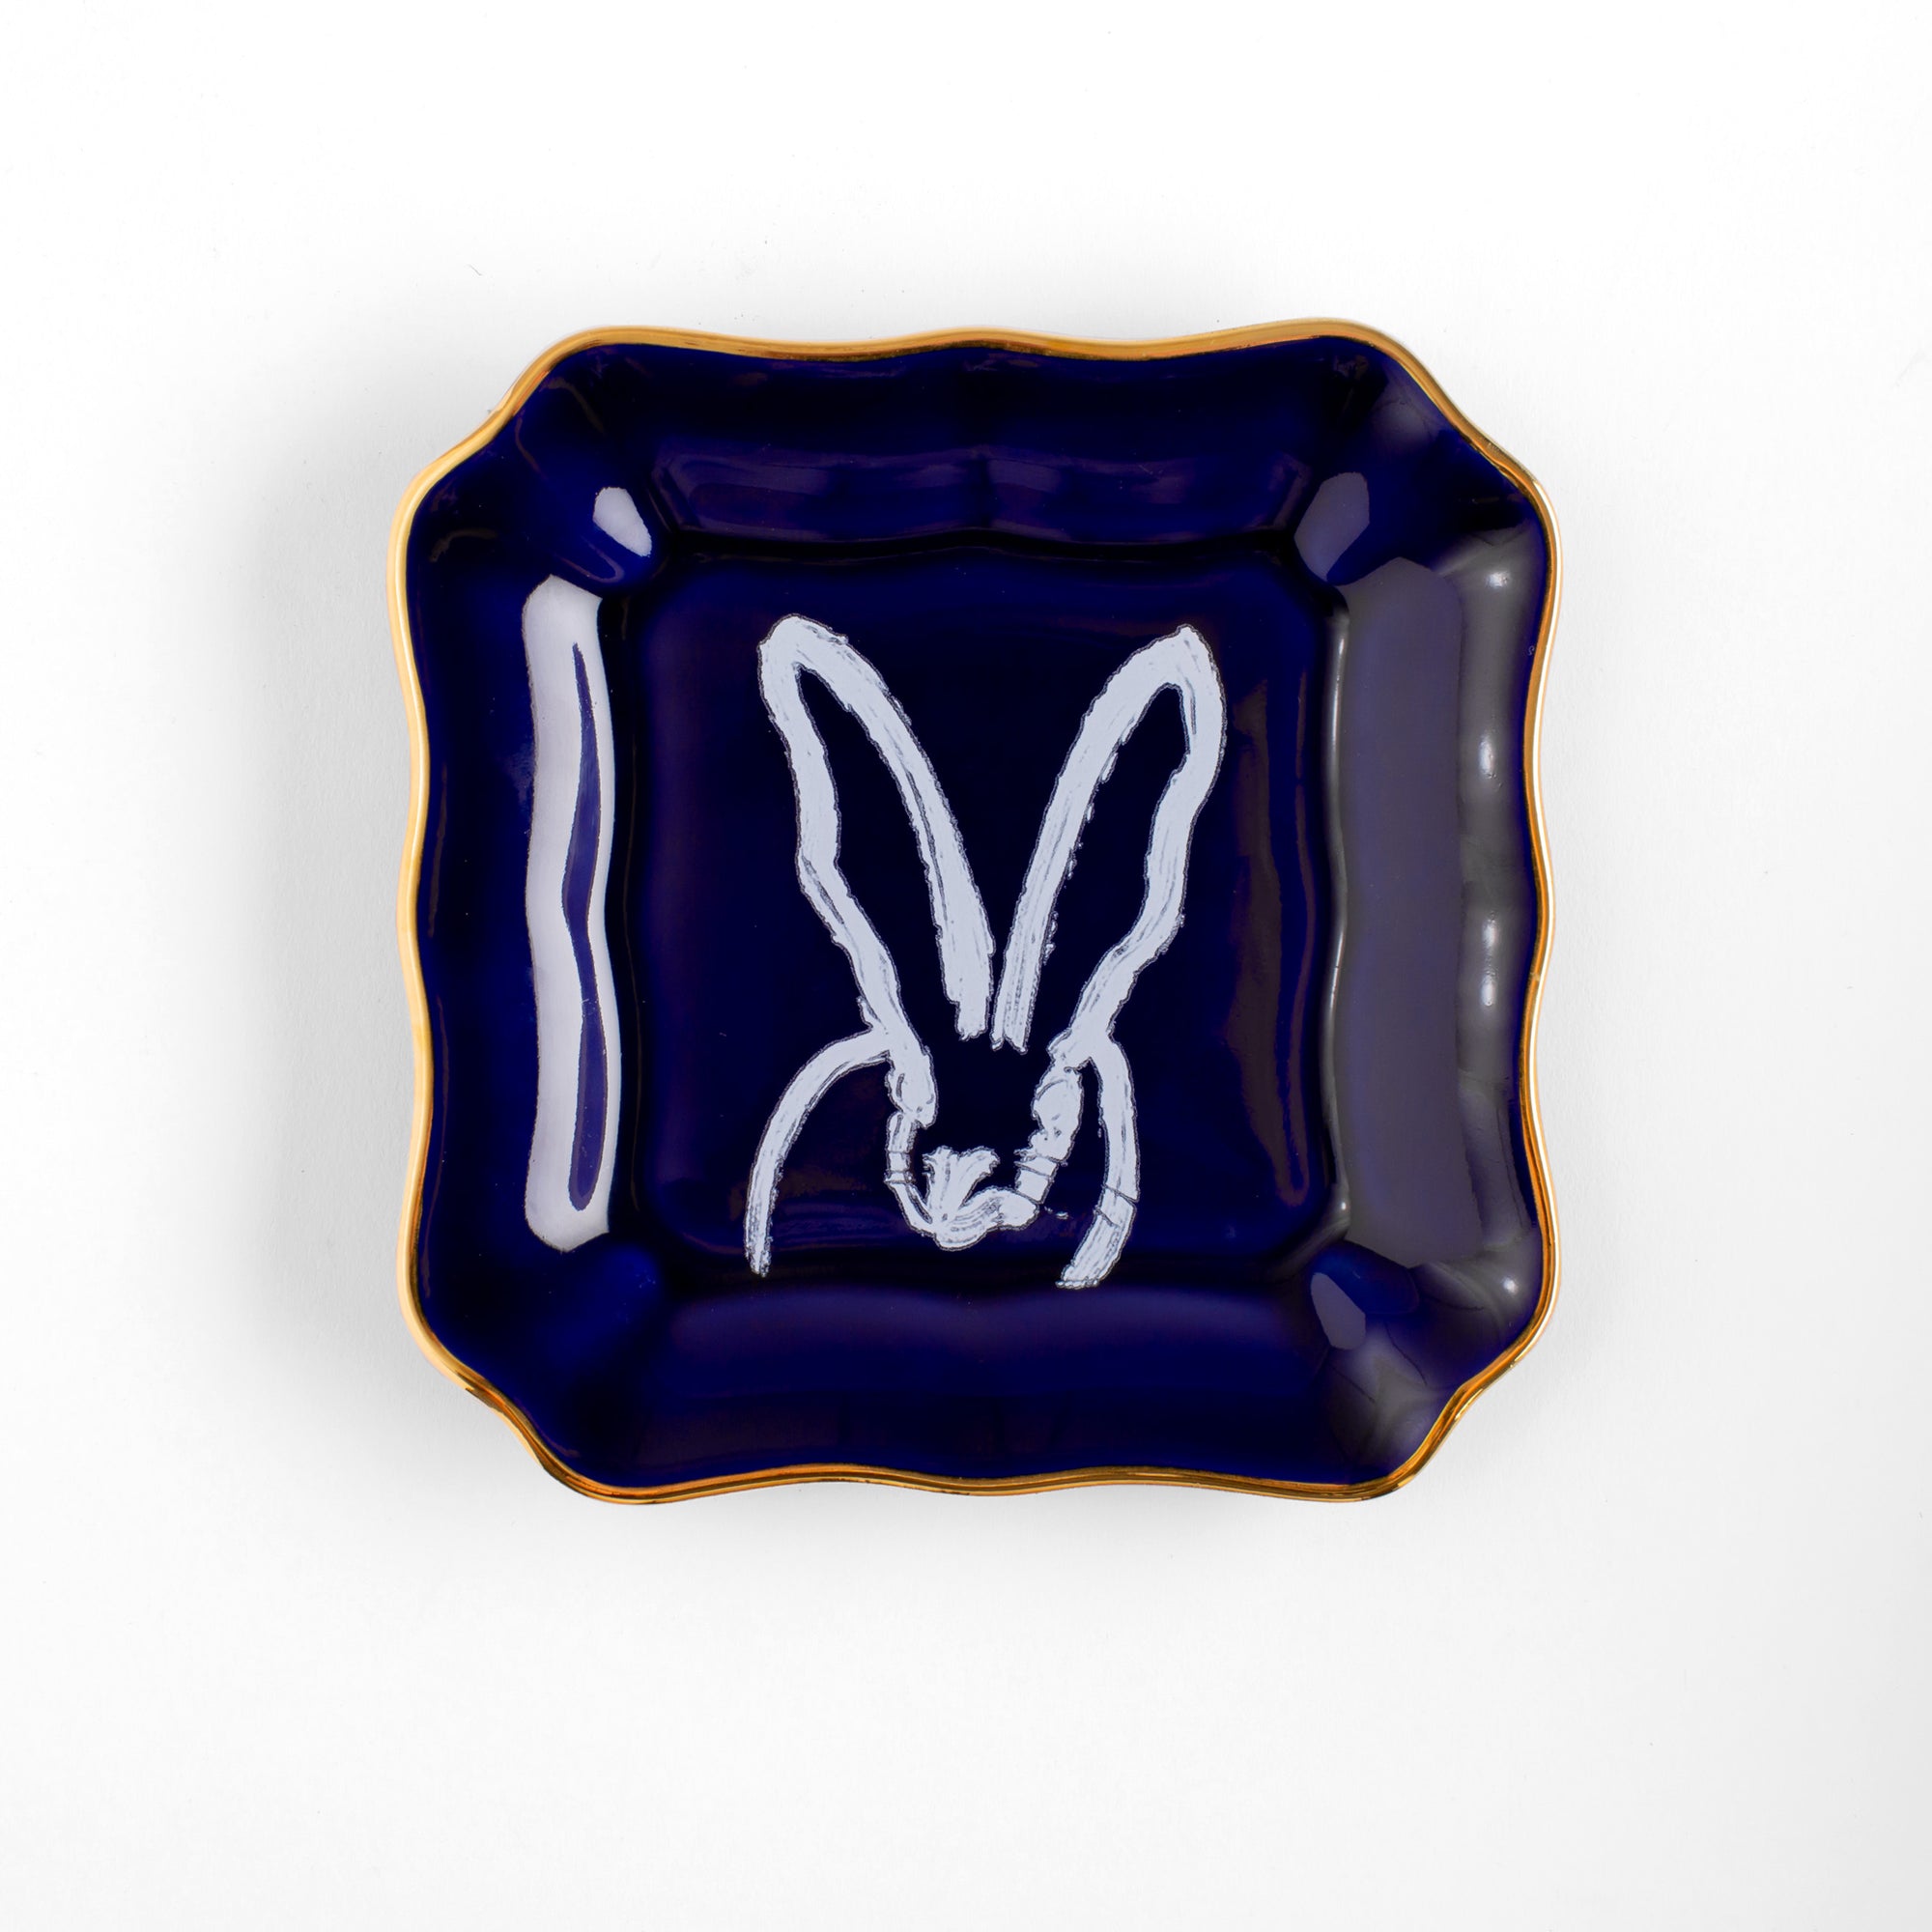 Set of 2 Bunny Portrait Plates - Cobalt with Hand-Painted Gold Rim